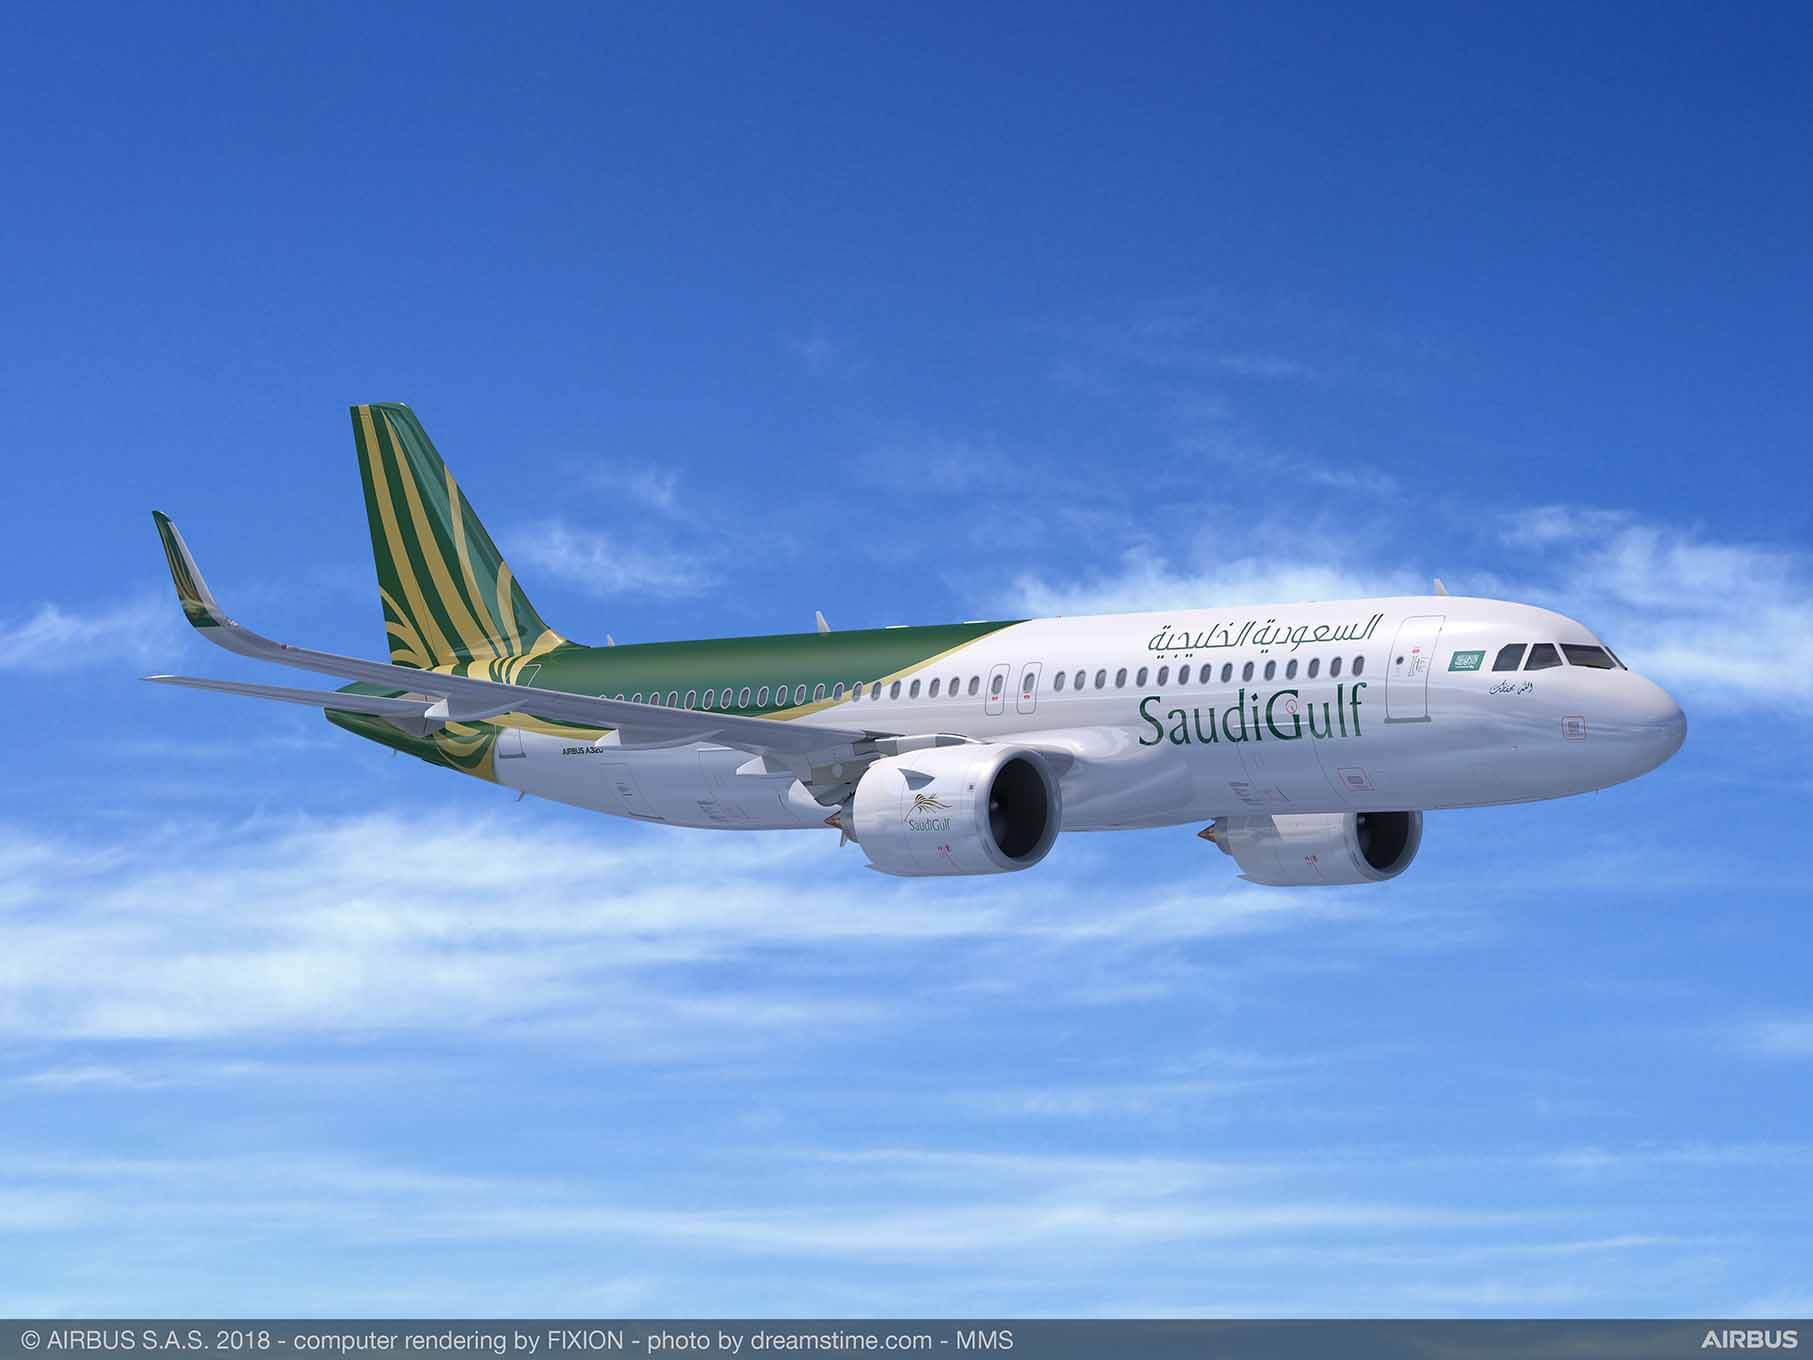 SaudiGulf Airlines to add ten A320neo family aircraft